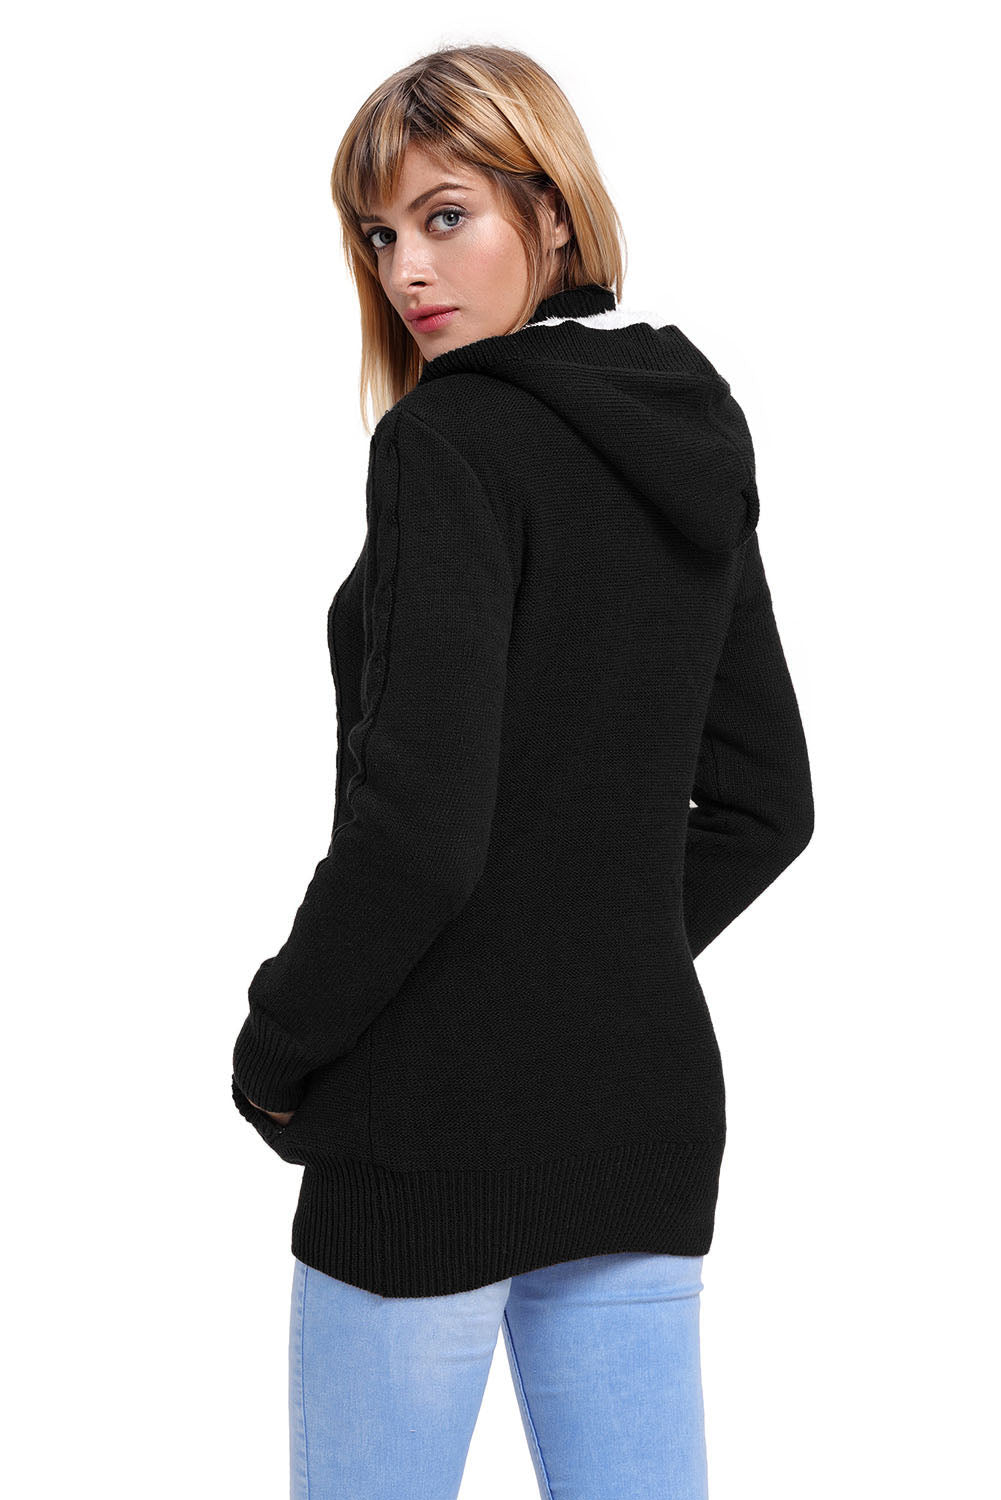 Black Long Sleeve Button-up Hooded Knit Cardigans